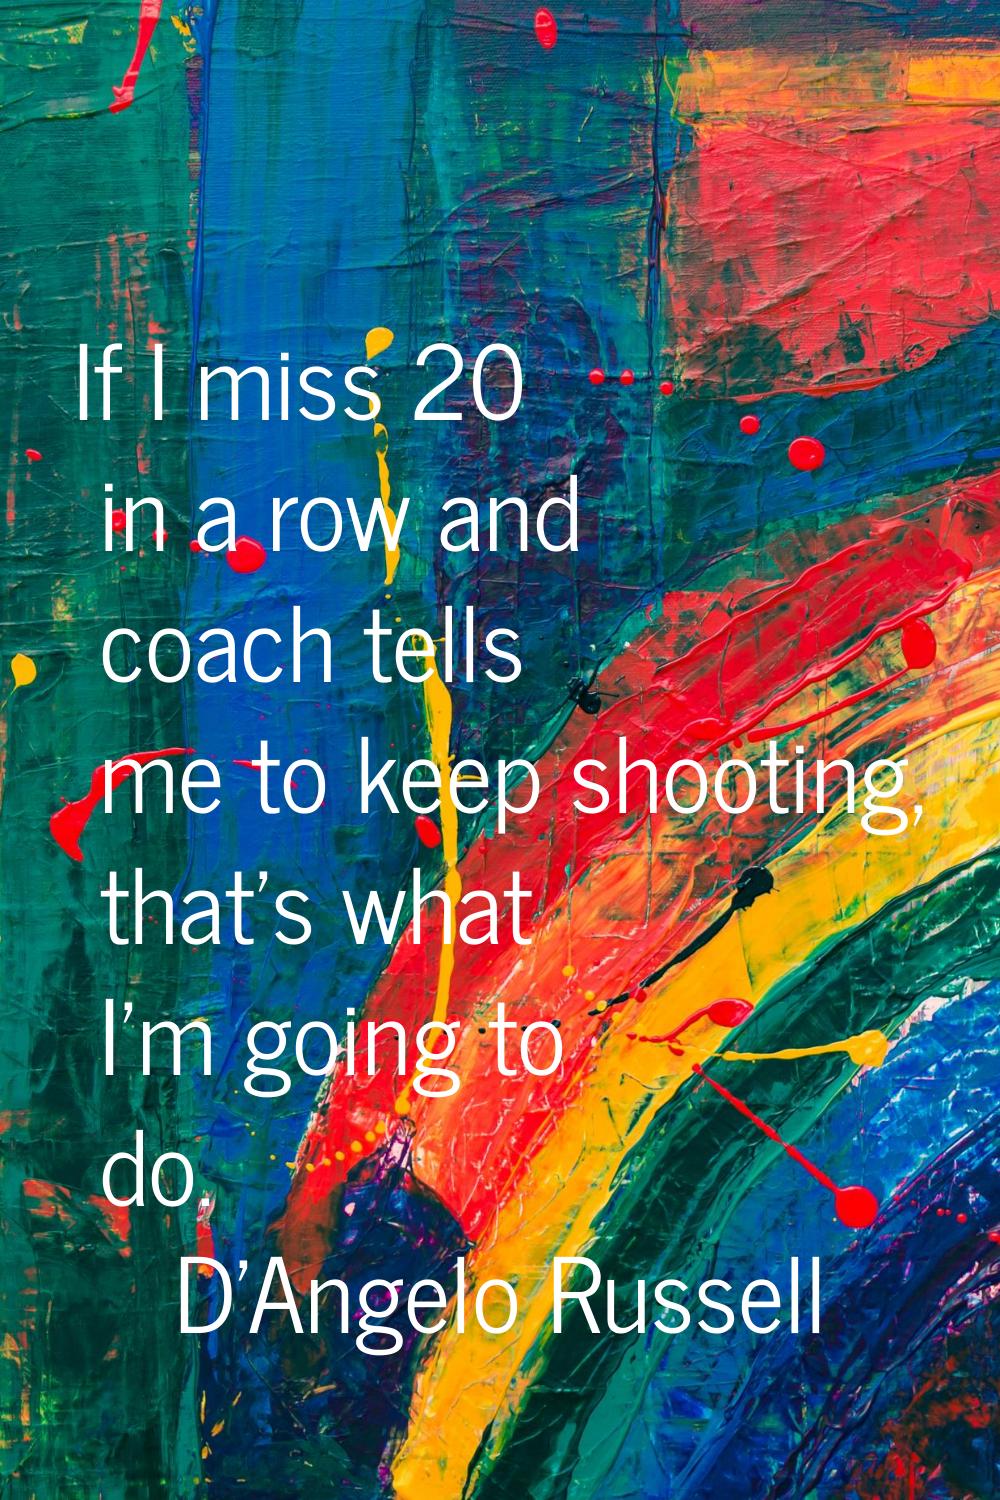 If I miss 20 in a row and coach tells me to keep shooting, that's what I'm going to do.